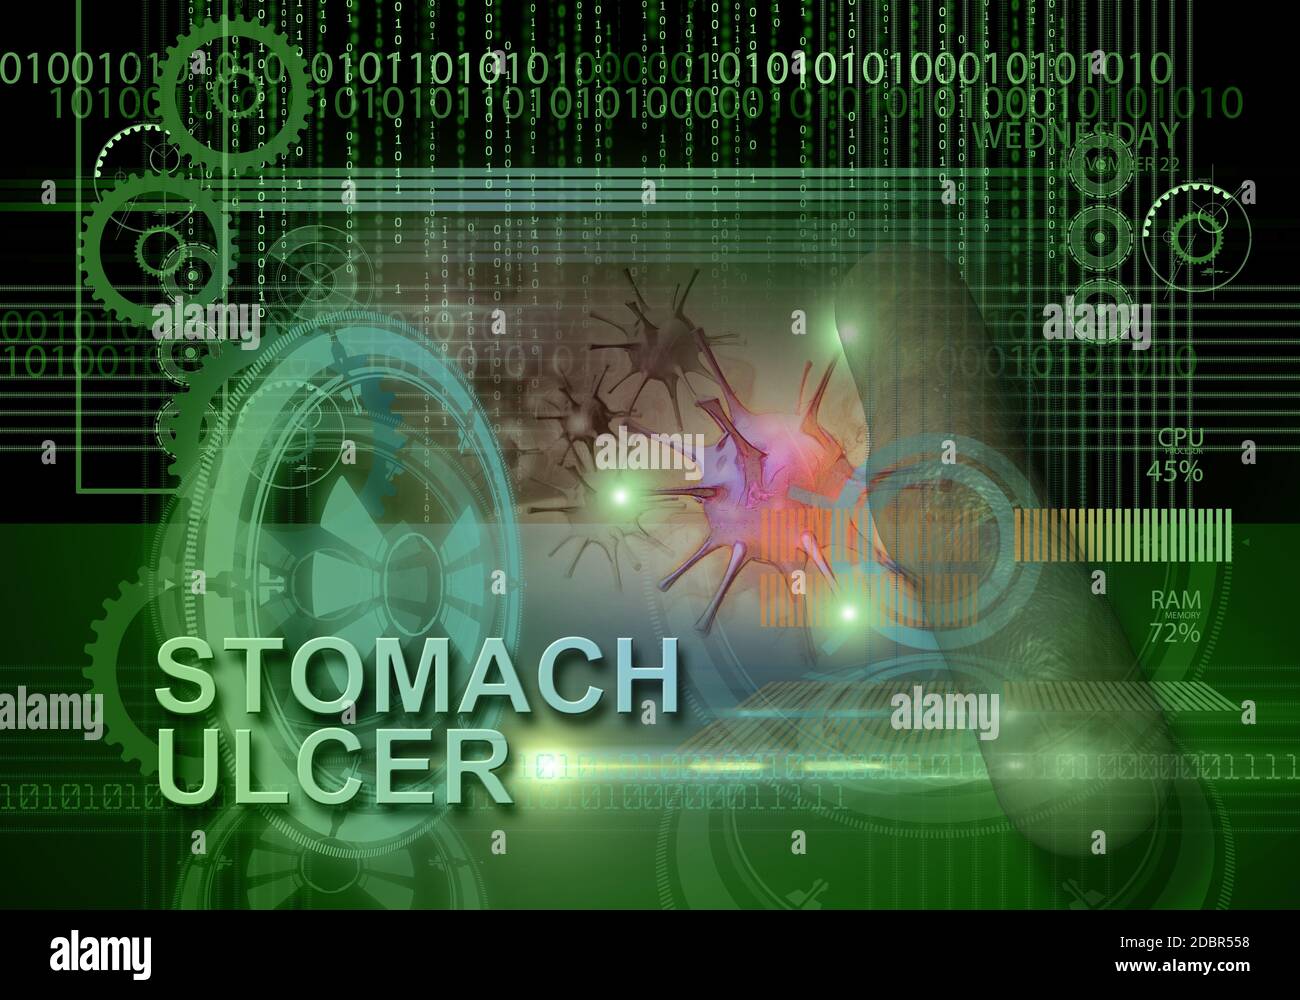 hi tech infographics of stomach ulcer made in 3d software Stock Photo